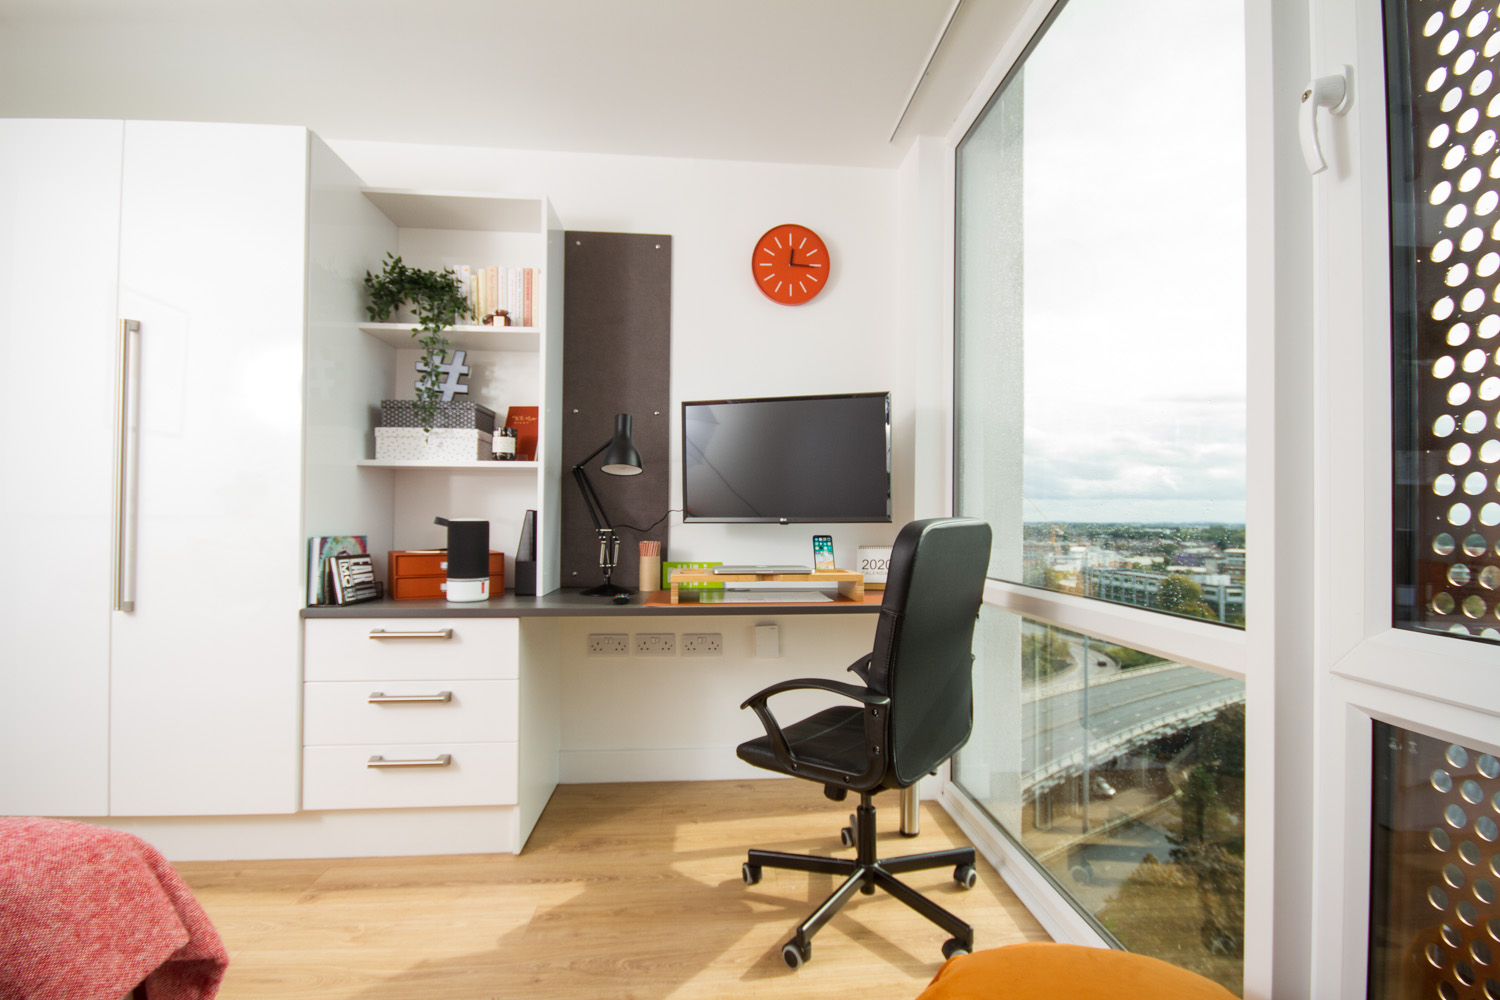 Upper Deluxe Studio Window and desk at CODE Student Accommodation Coventry